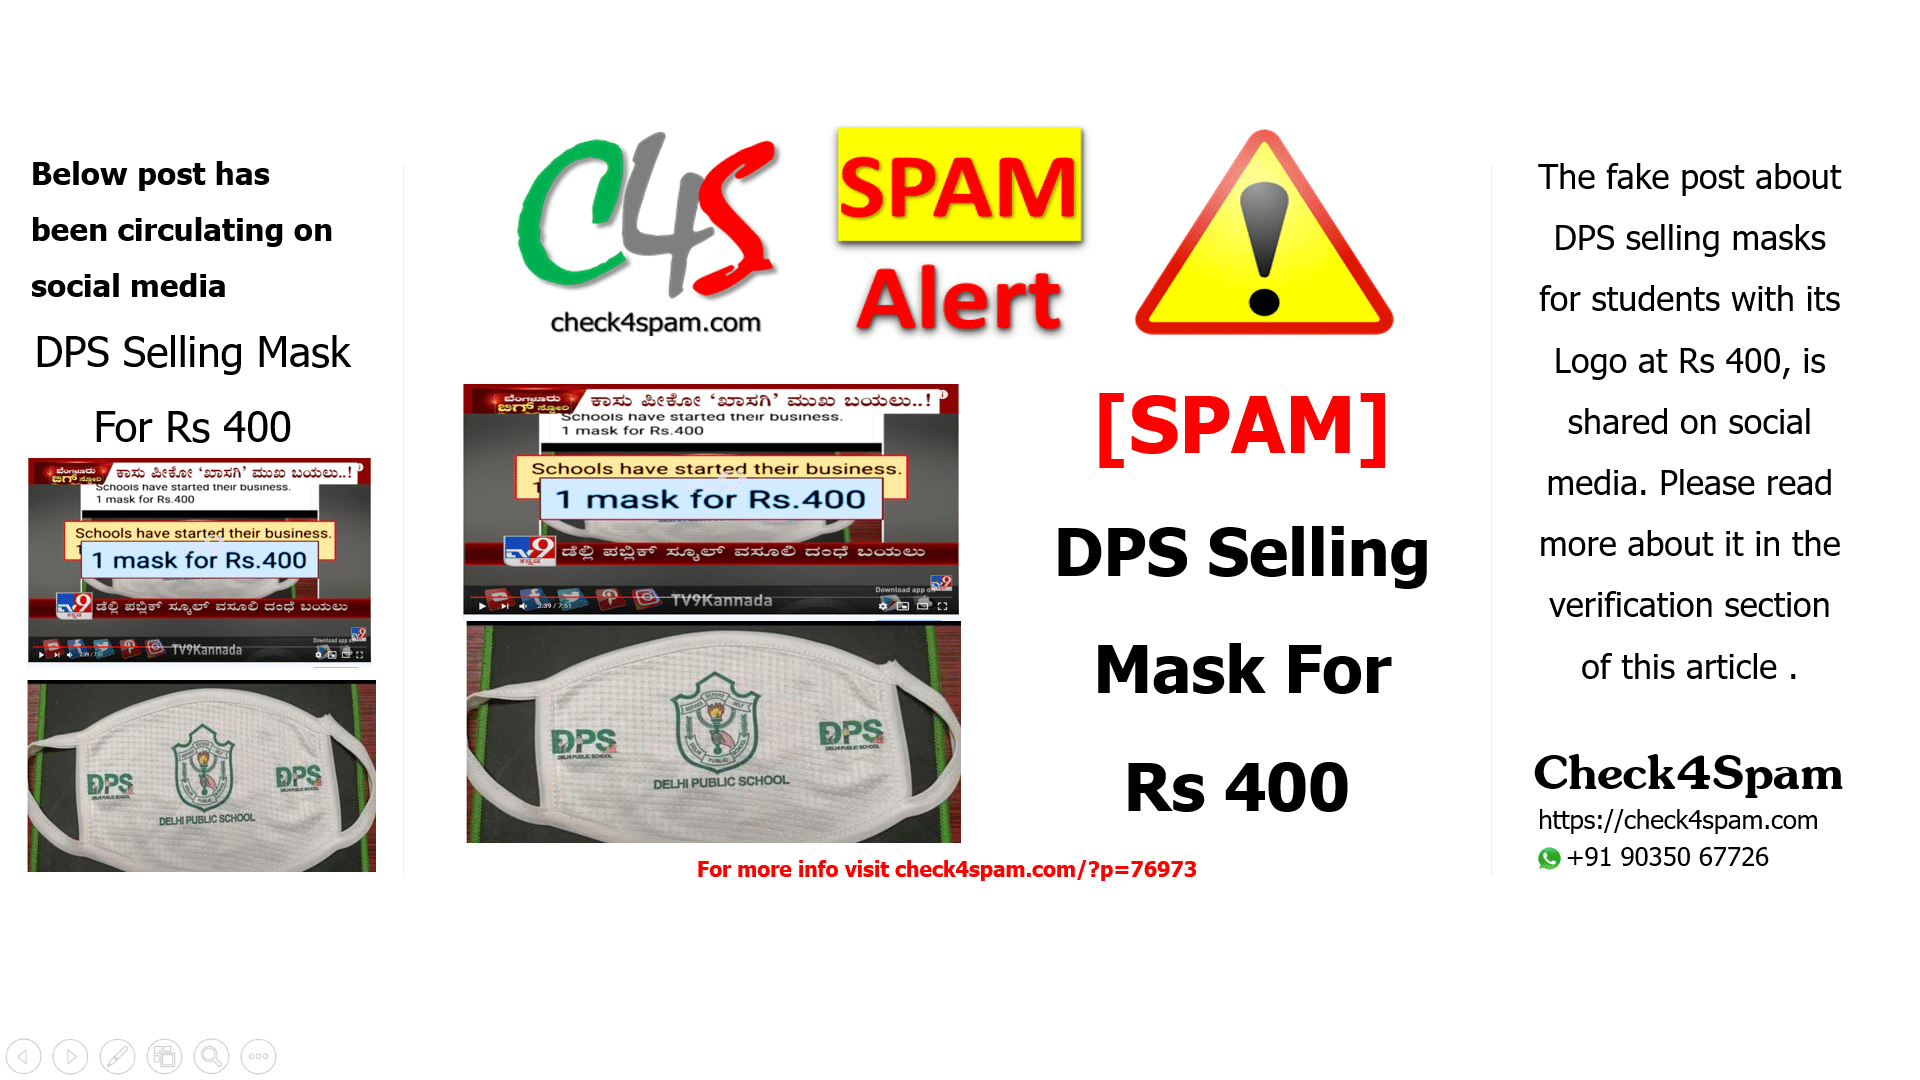 DPS Selling Mask For Rs 400